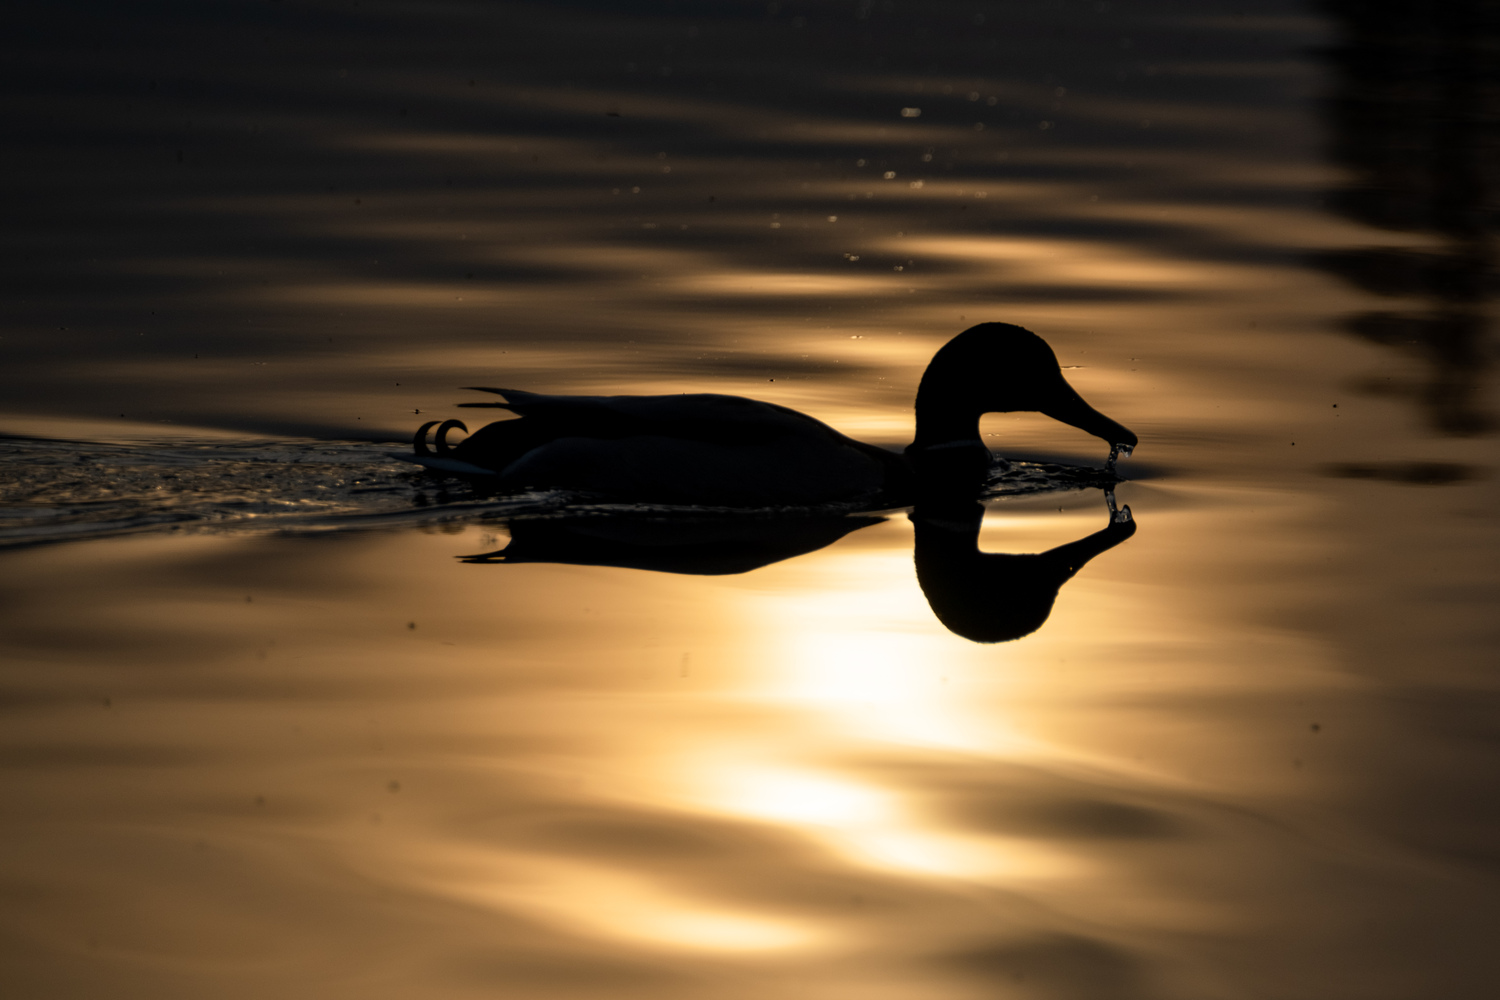 A silhouette of a swimming duck, sundown reflection on the water.